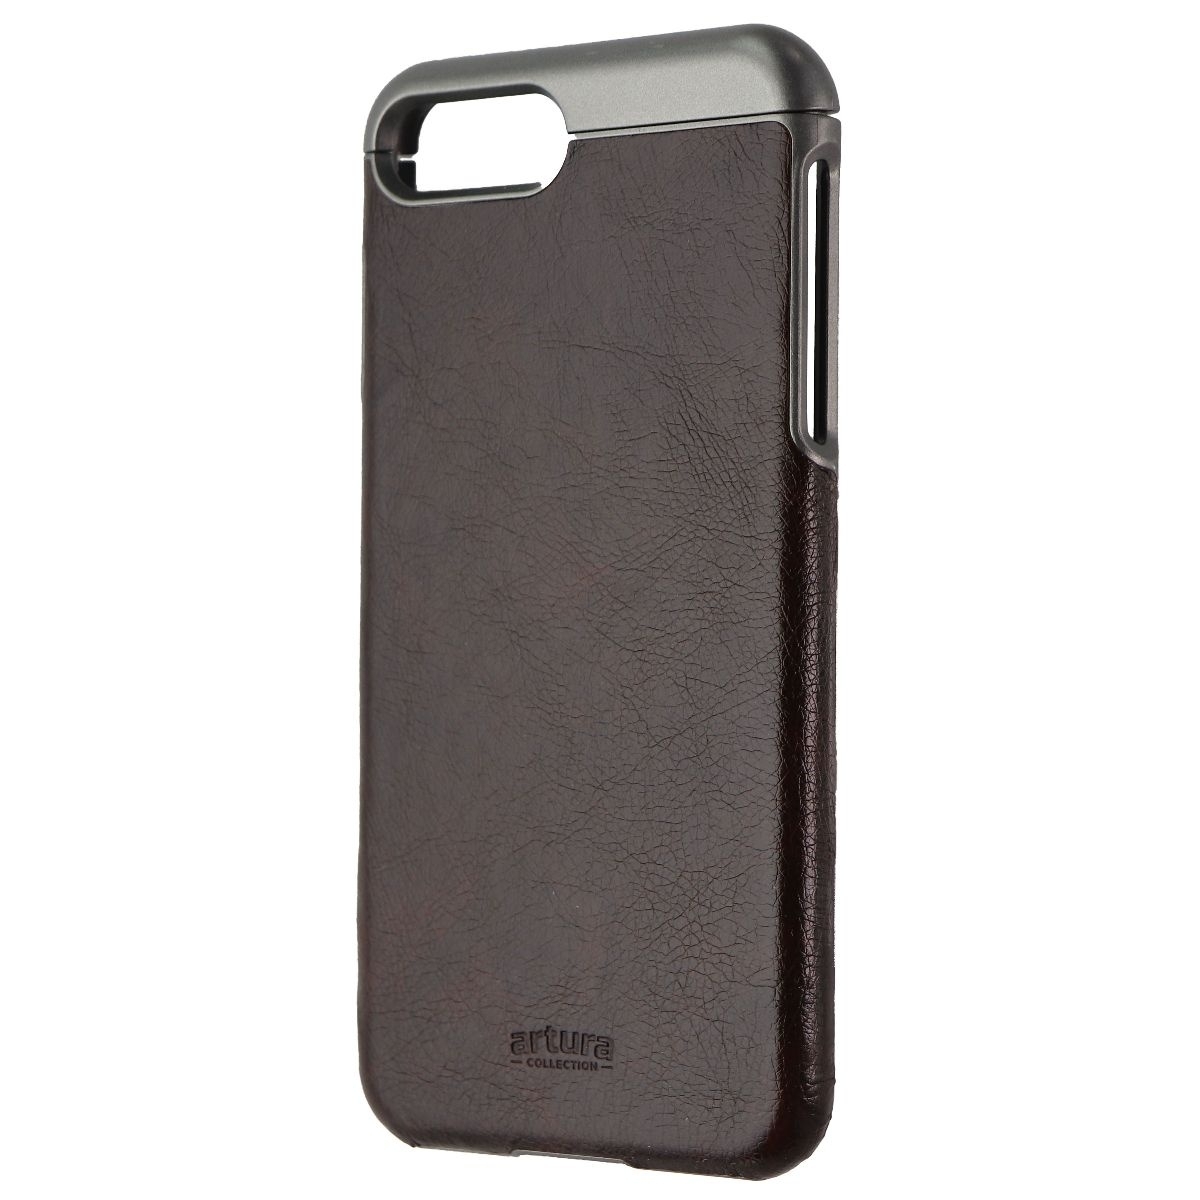 Encased - Artura Collection - Brown/Grey Leather For IPhone 7 Plus